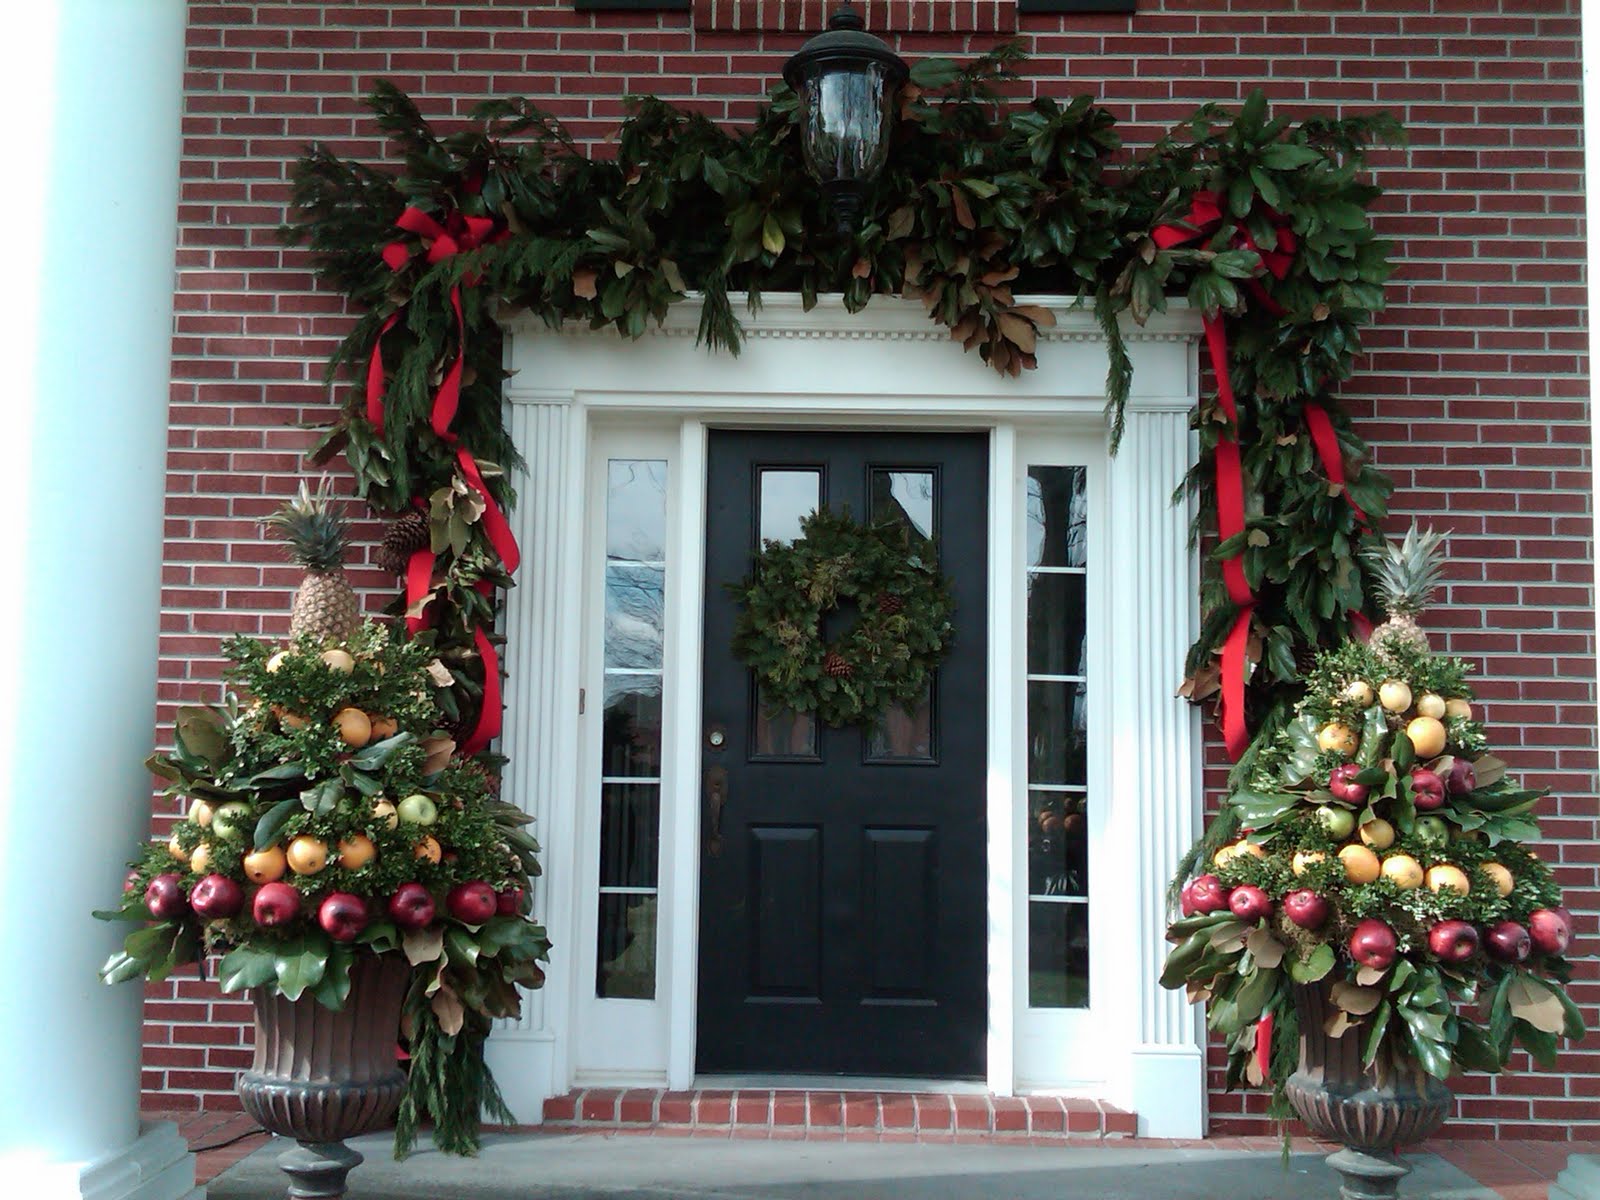 exterior-architecture-rich-and-beauty-christmas-decorating-ideas-for-rustic-front-porch-ideas-with-black-half-glass-entry-doors-added-wreath-as-well-as-brick-wall-facade-designs-.jpg